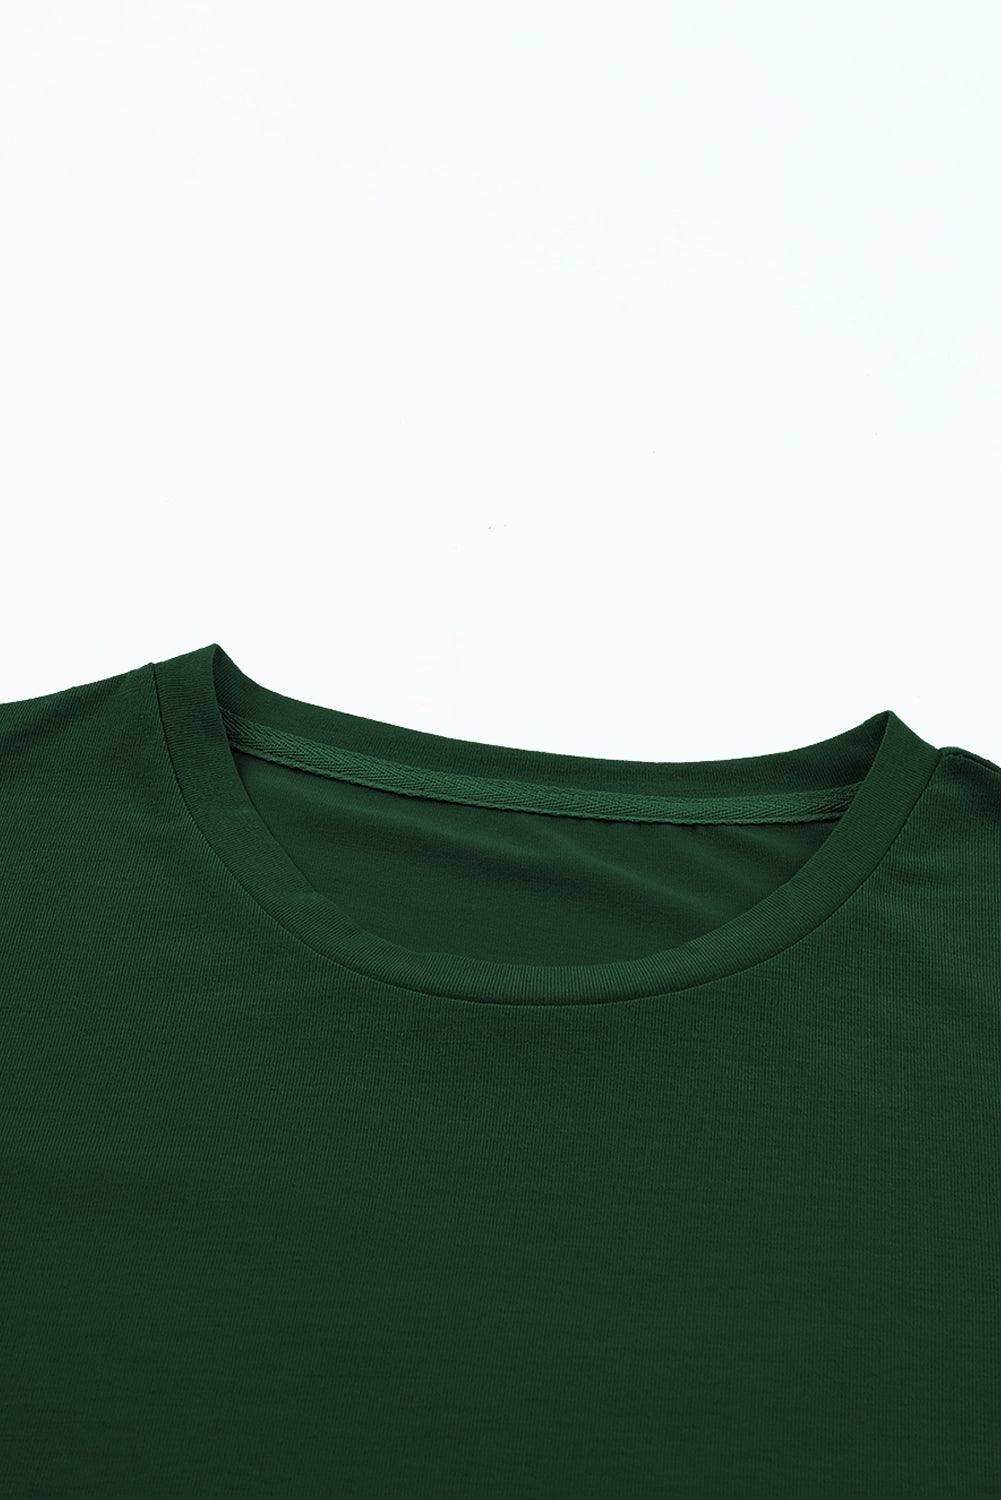 Green Casual Crew Neck Solid Color T-Shirts Loose Lightweight Tops for Women